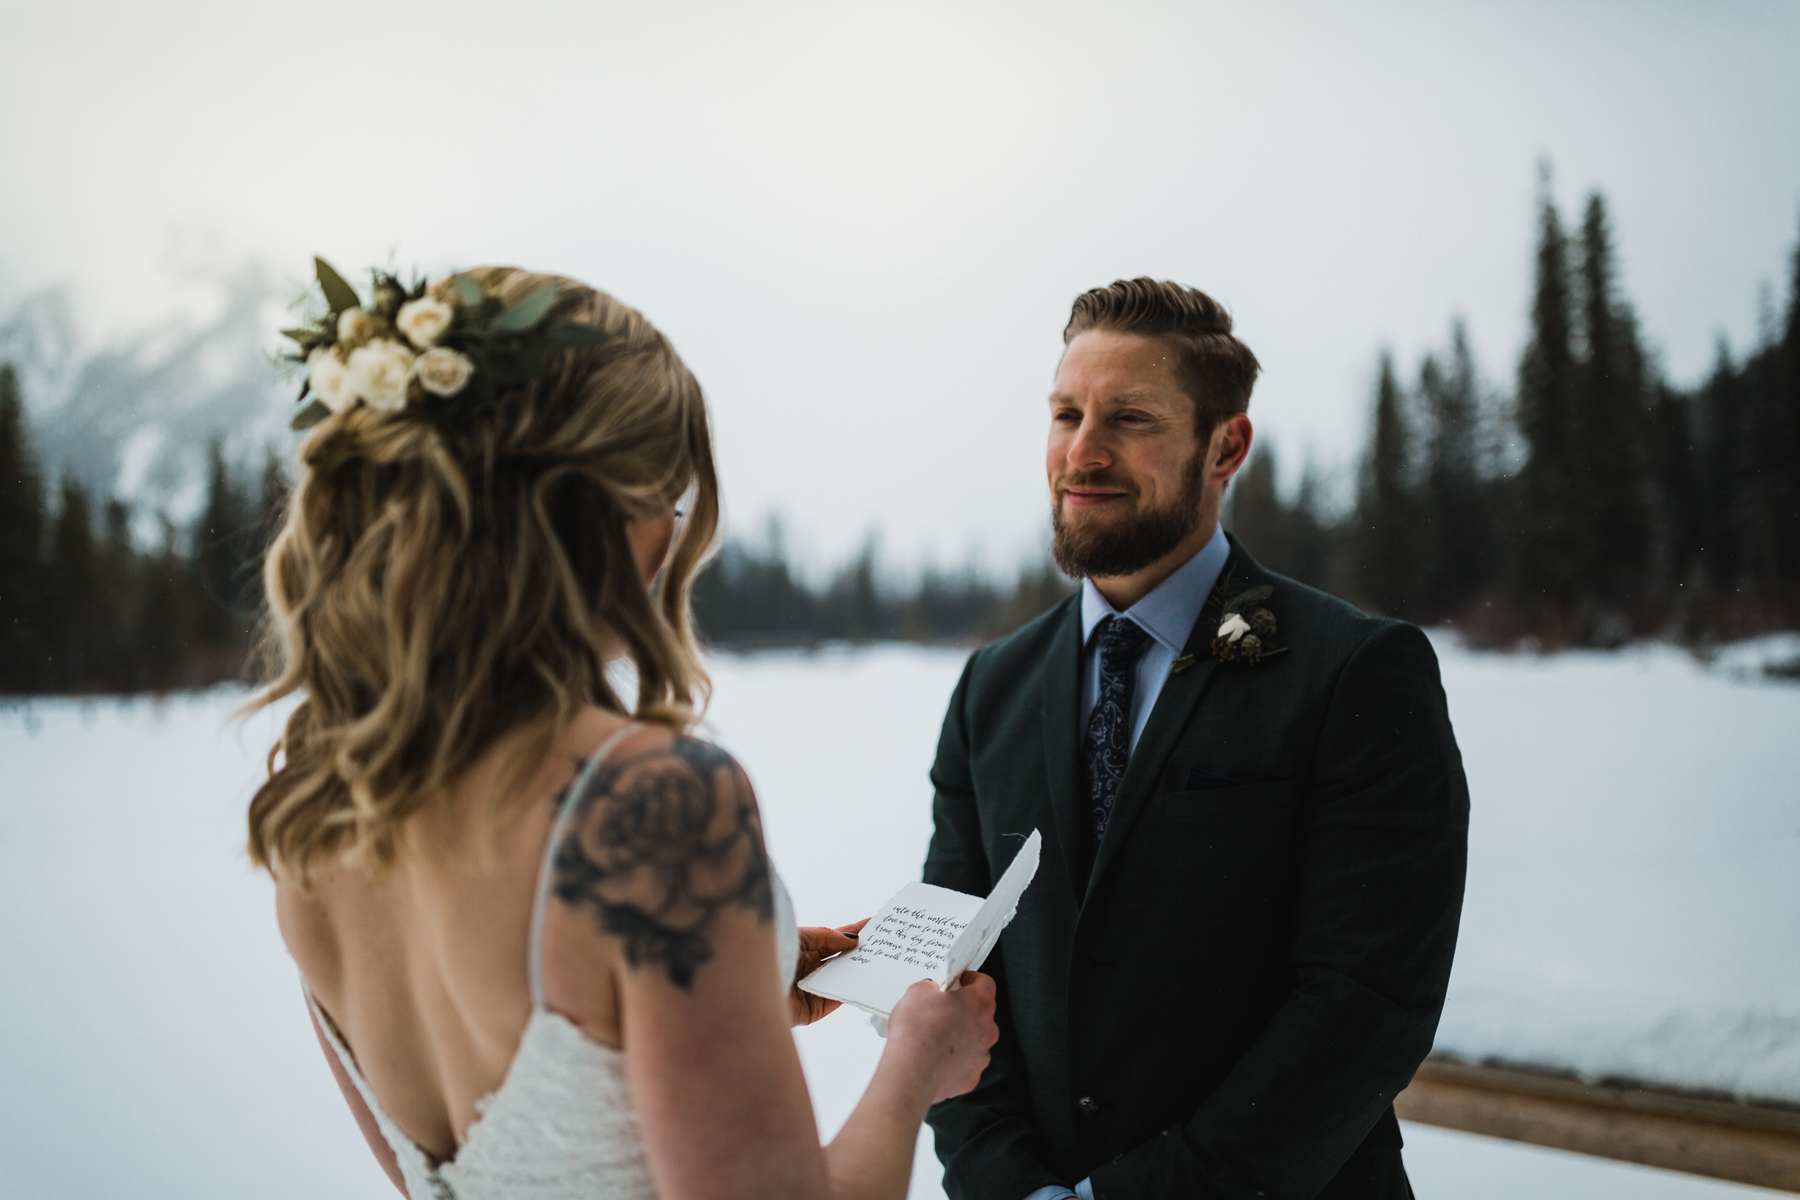 Canmore Elopement Photographer in the Canadian Rockies - Image 26